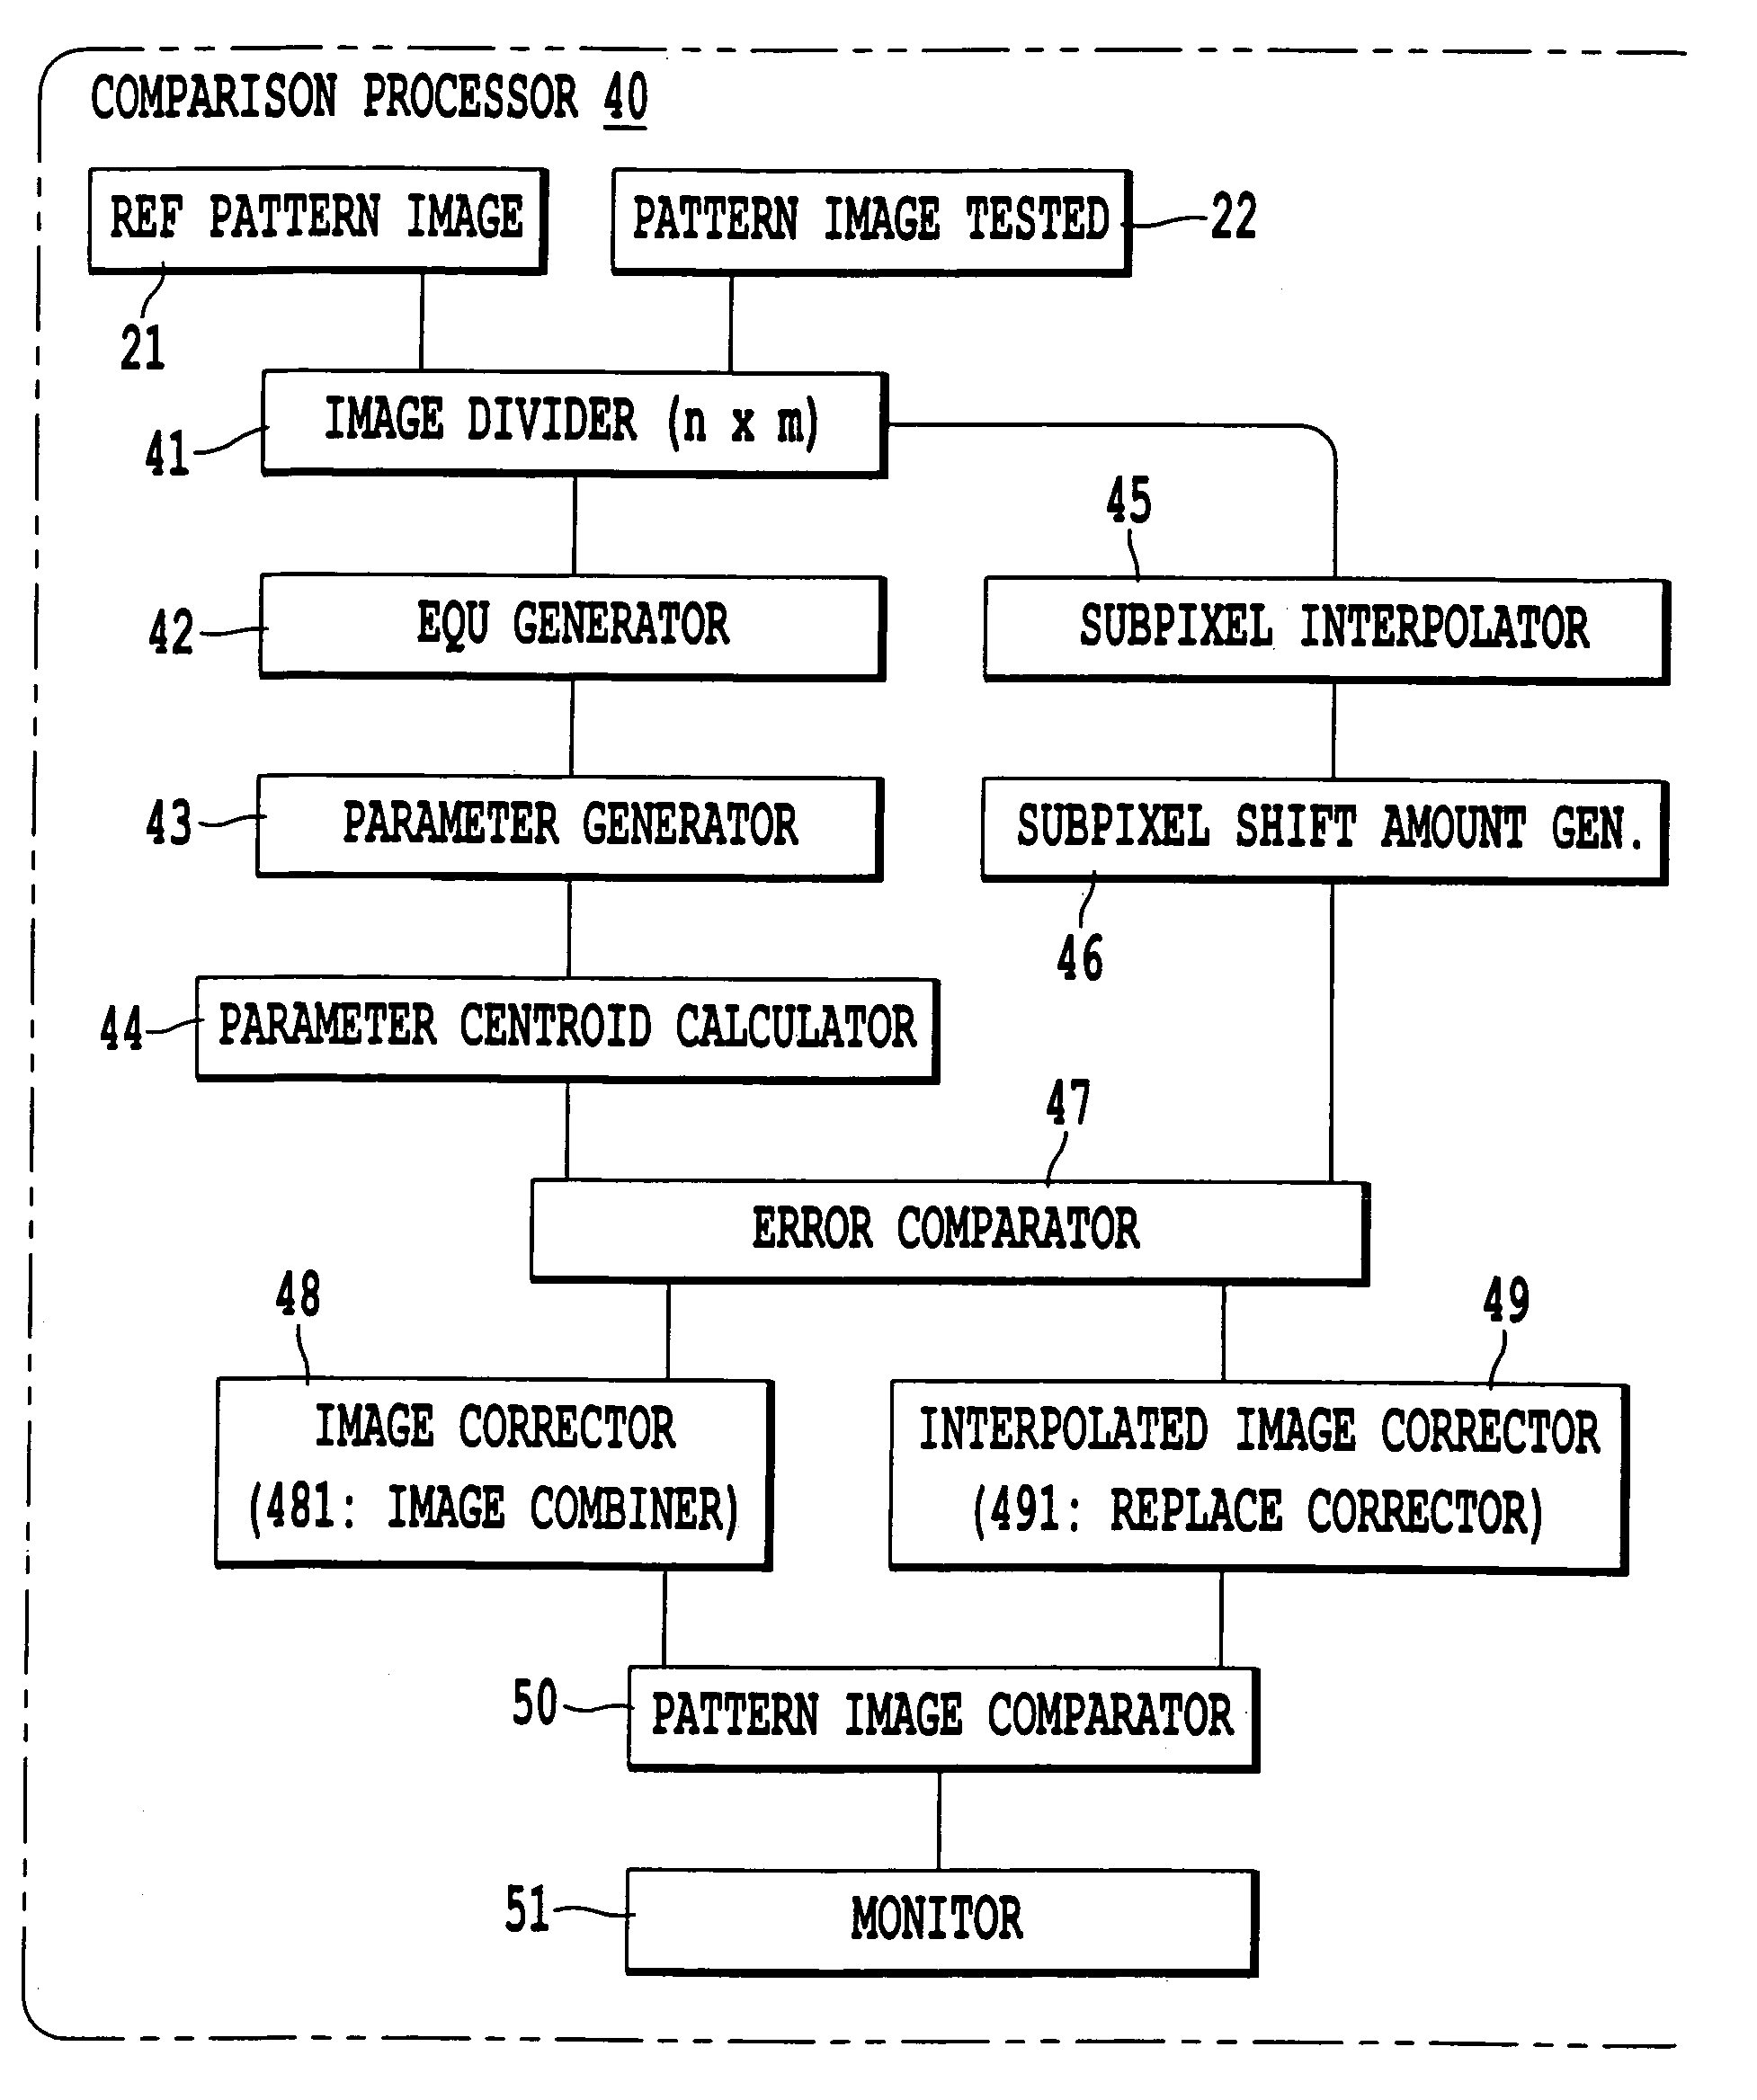 Pattern inspection system using image correction scheme with object-sensitive automatic mode switchability